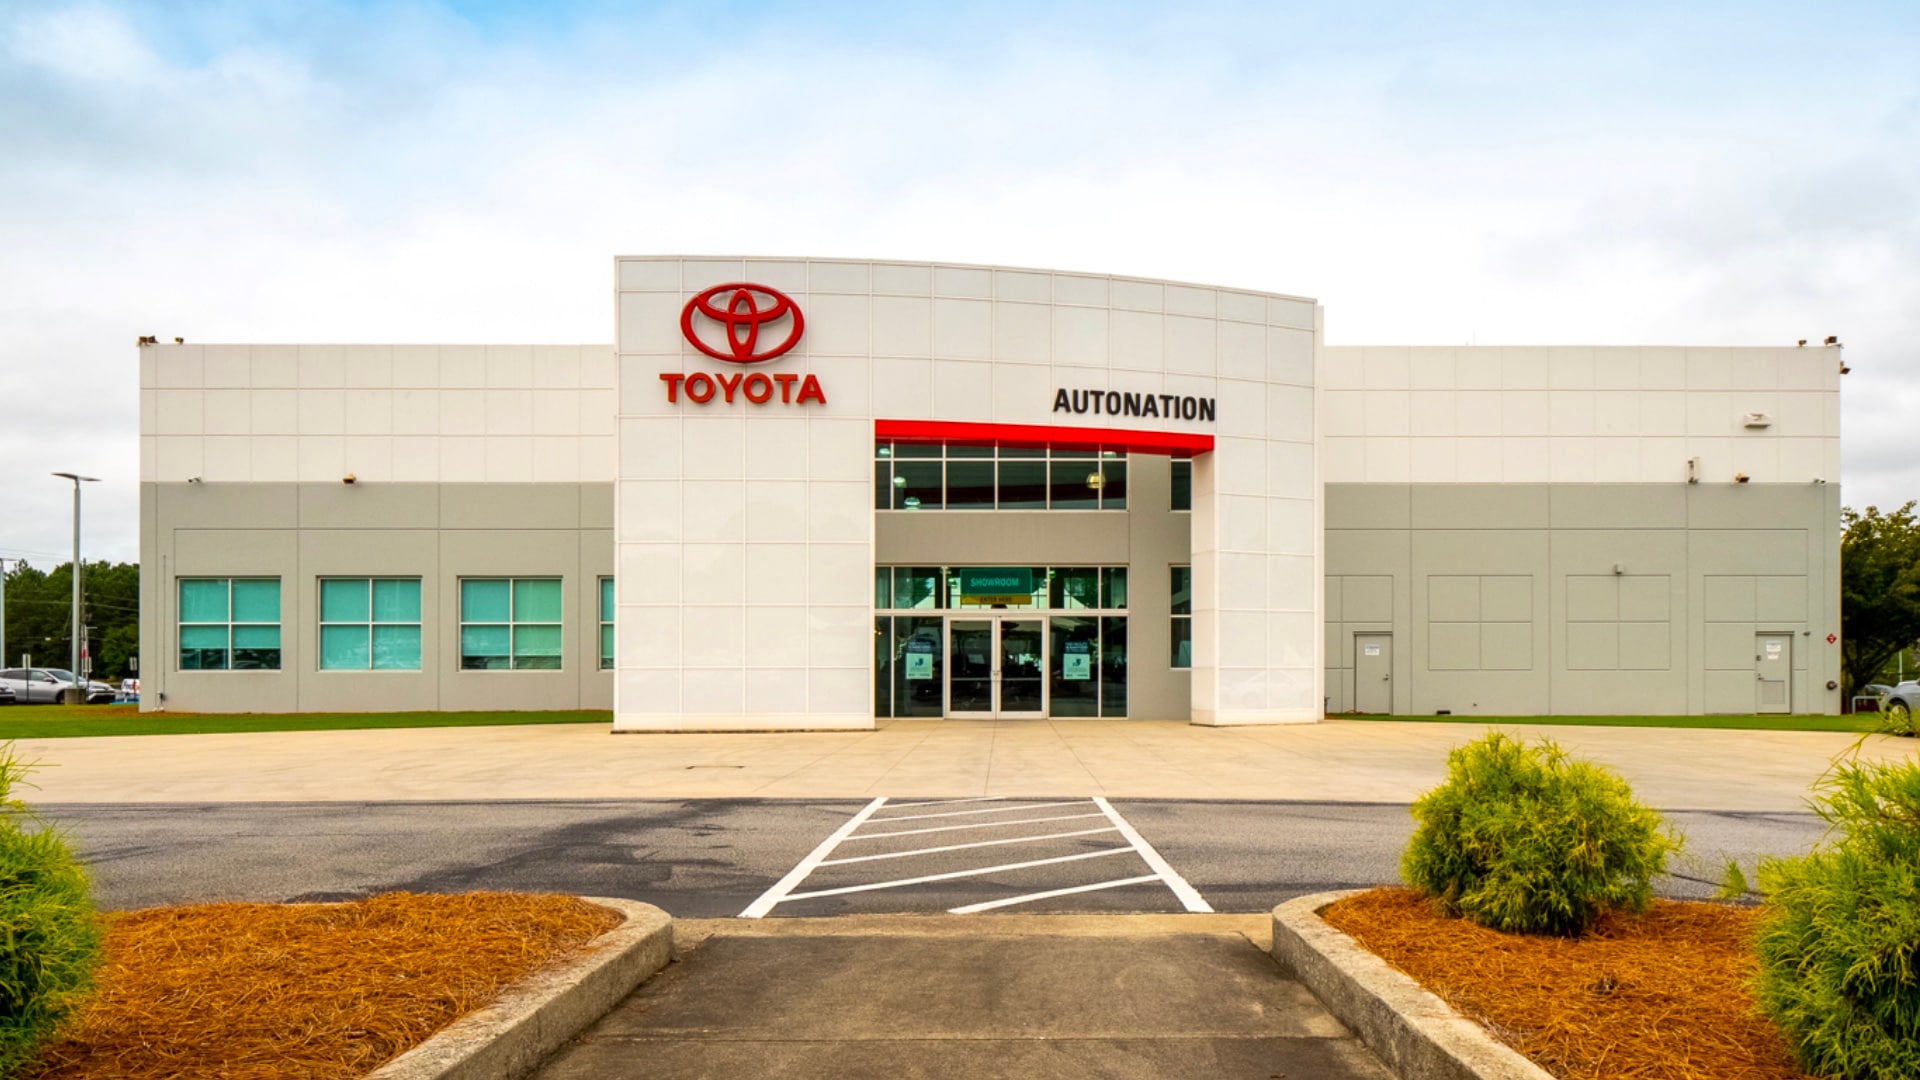 Exterior view of AutoNation Toyota Thornton Road on a partly cloudy day. The building is grey and white and has some large windows. Several vehicles can be seen near the building, which also has trees near nearby.